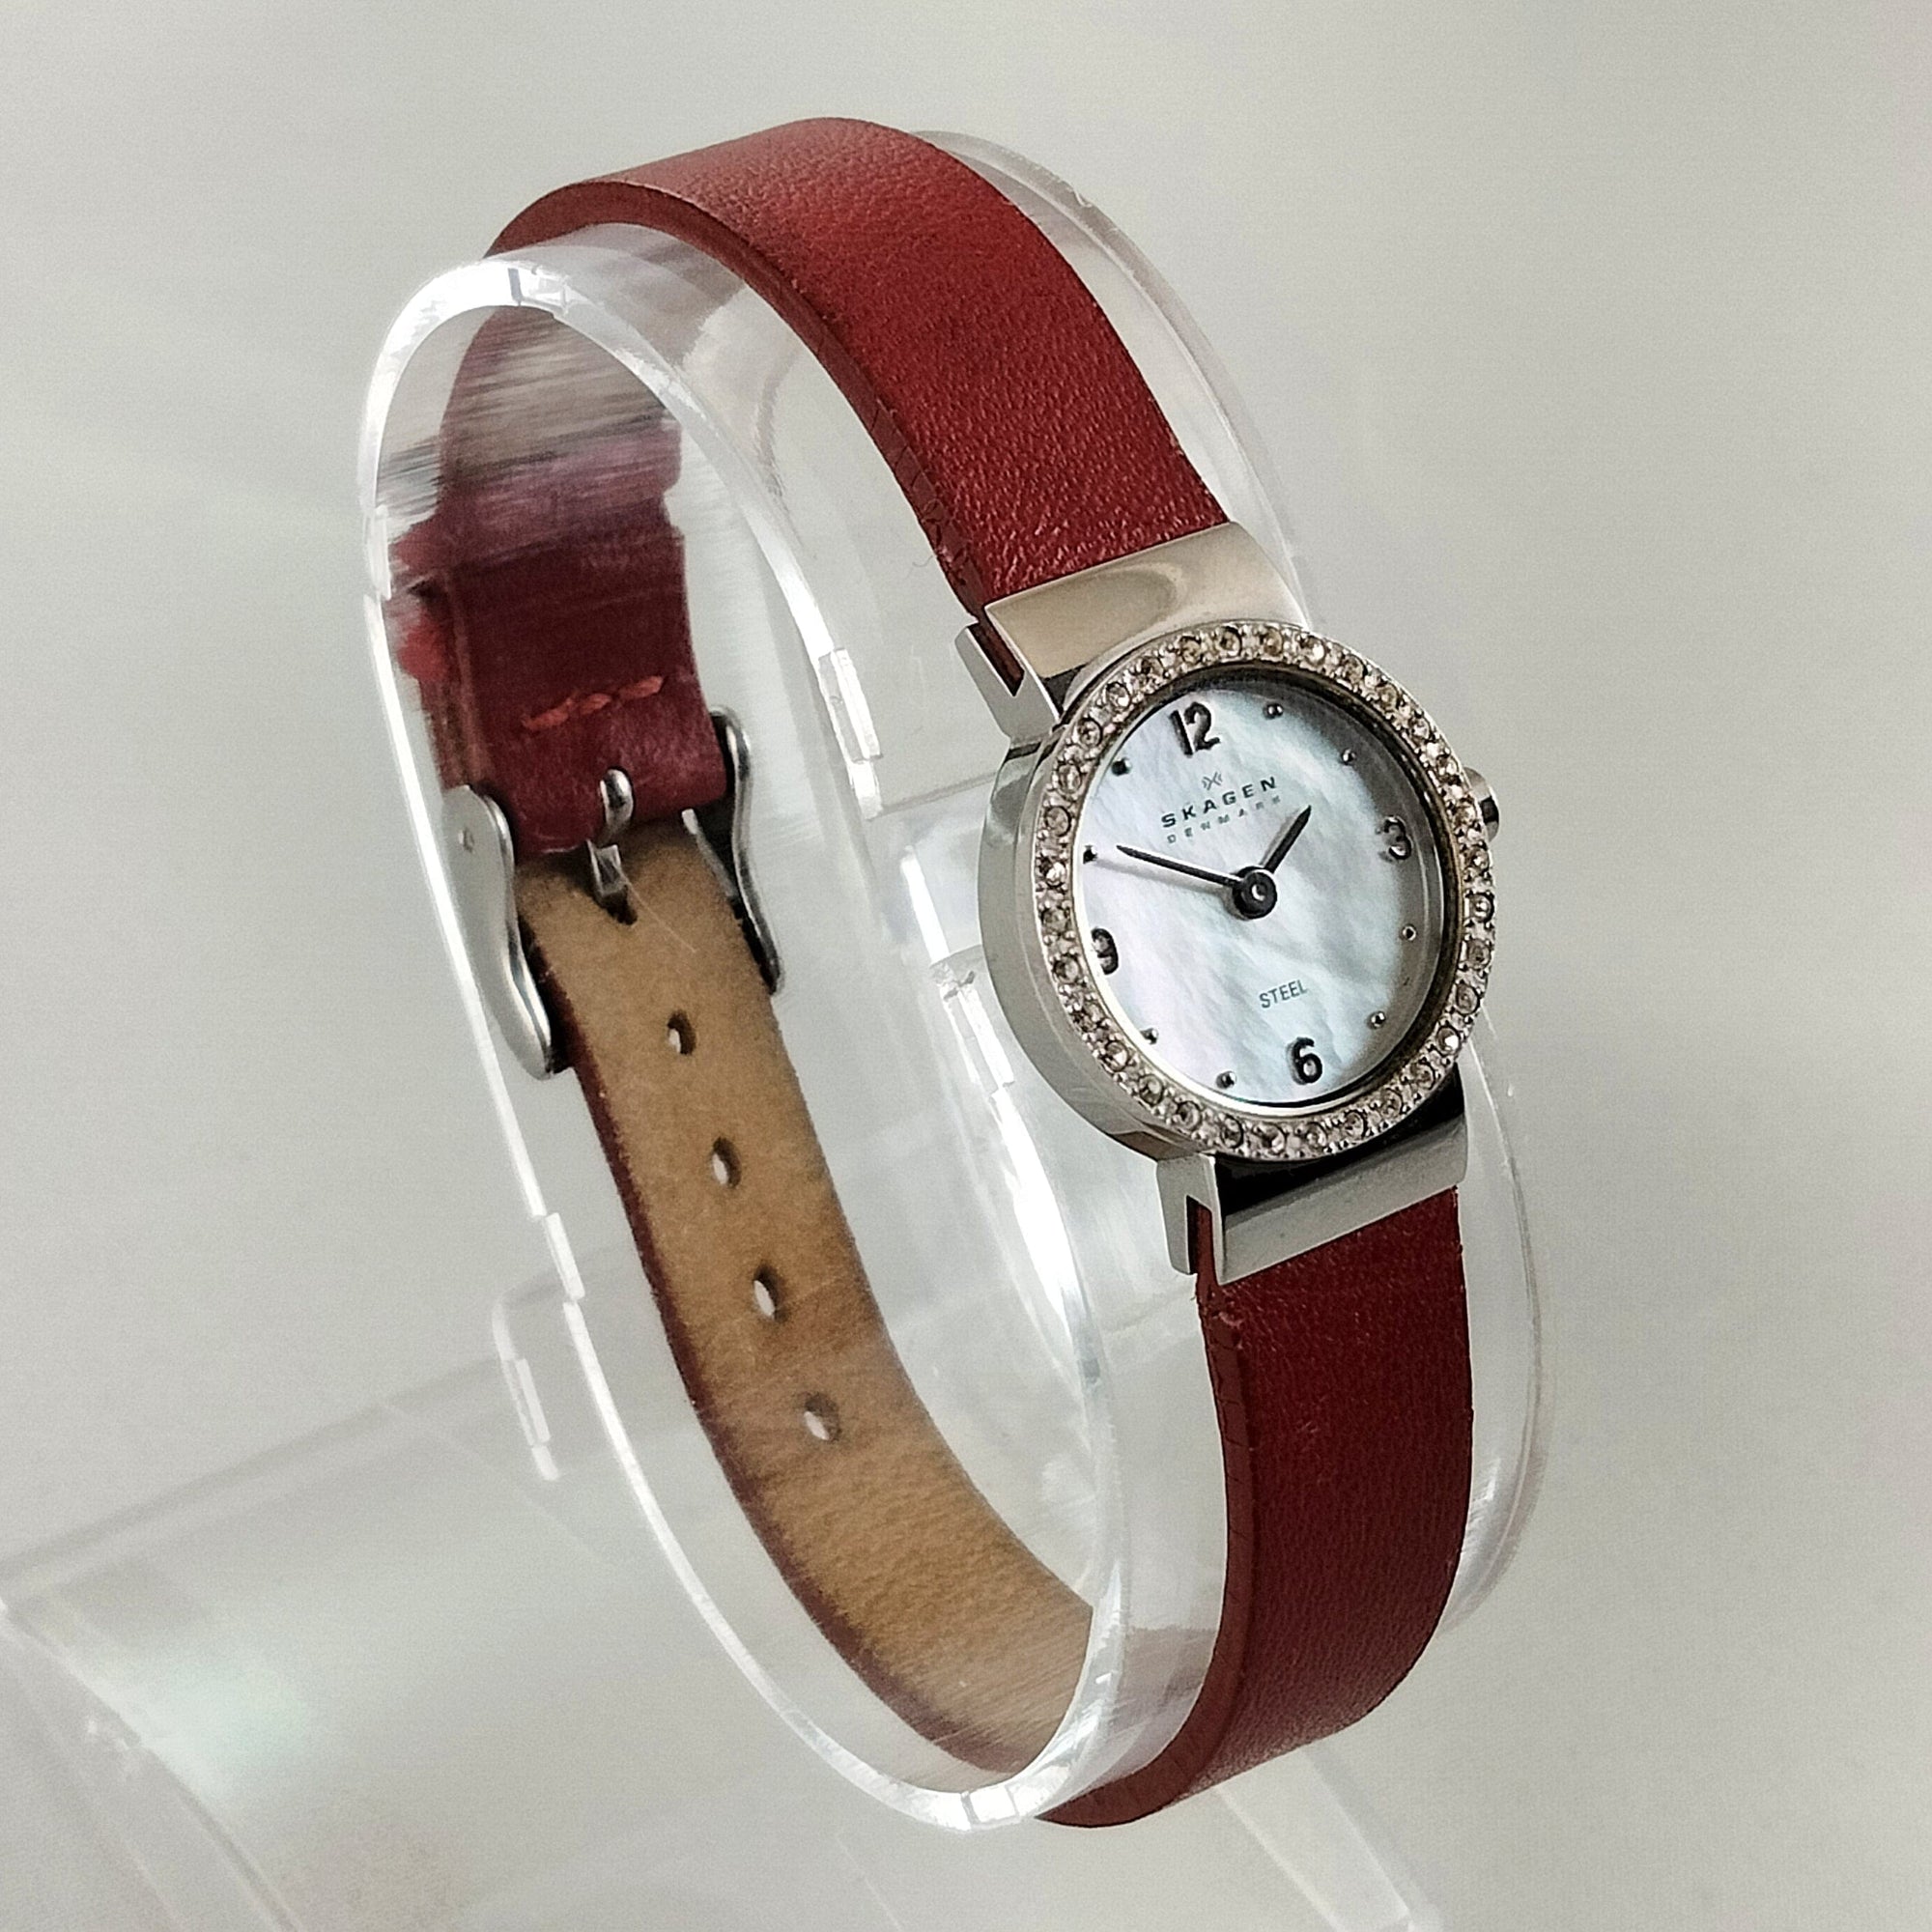 I Like Mikes Mid Century Modern Watches Skagen Women's Stainless Steel Watch, Mother of Pearl Dial, Red Leather Strap, Jewel Details